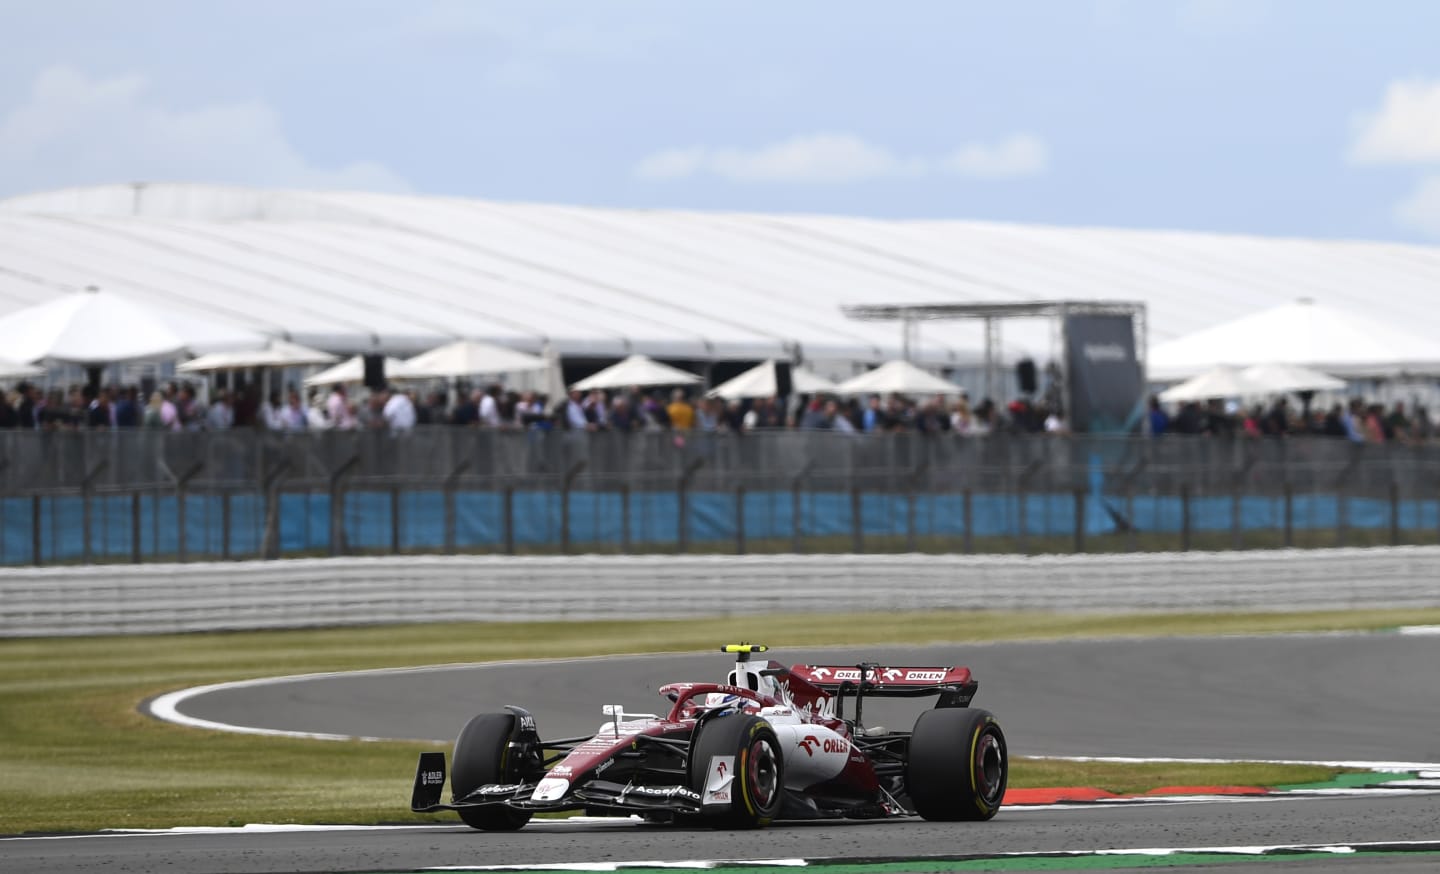 NORTHAMPTON, ENGLAND - JULY 01: Zhou Guanyu of China driving the (24) Alfa Romeo F1 C42 Ferrari on track during practice ahead of the F1 Grand Prix of Great Britain at Silverstone on July 01, 2022 in Northampton, England. (Photo by Rudy Carezzevoli - Formula 1/Formula 1 via Getty Images)